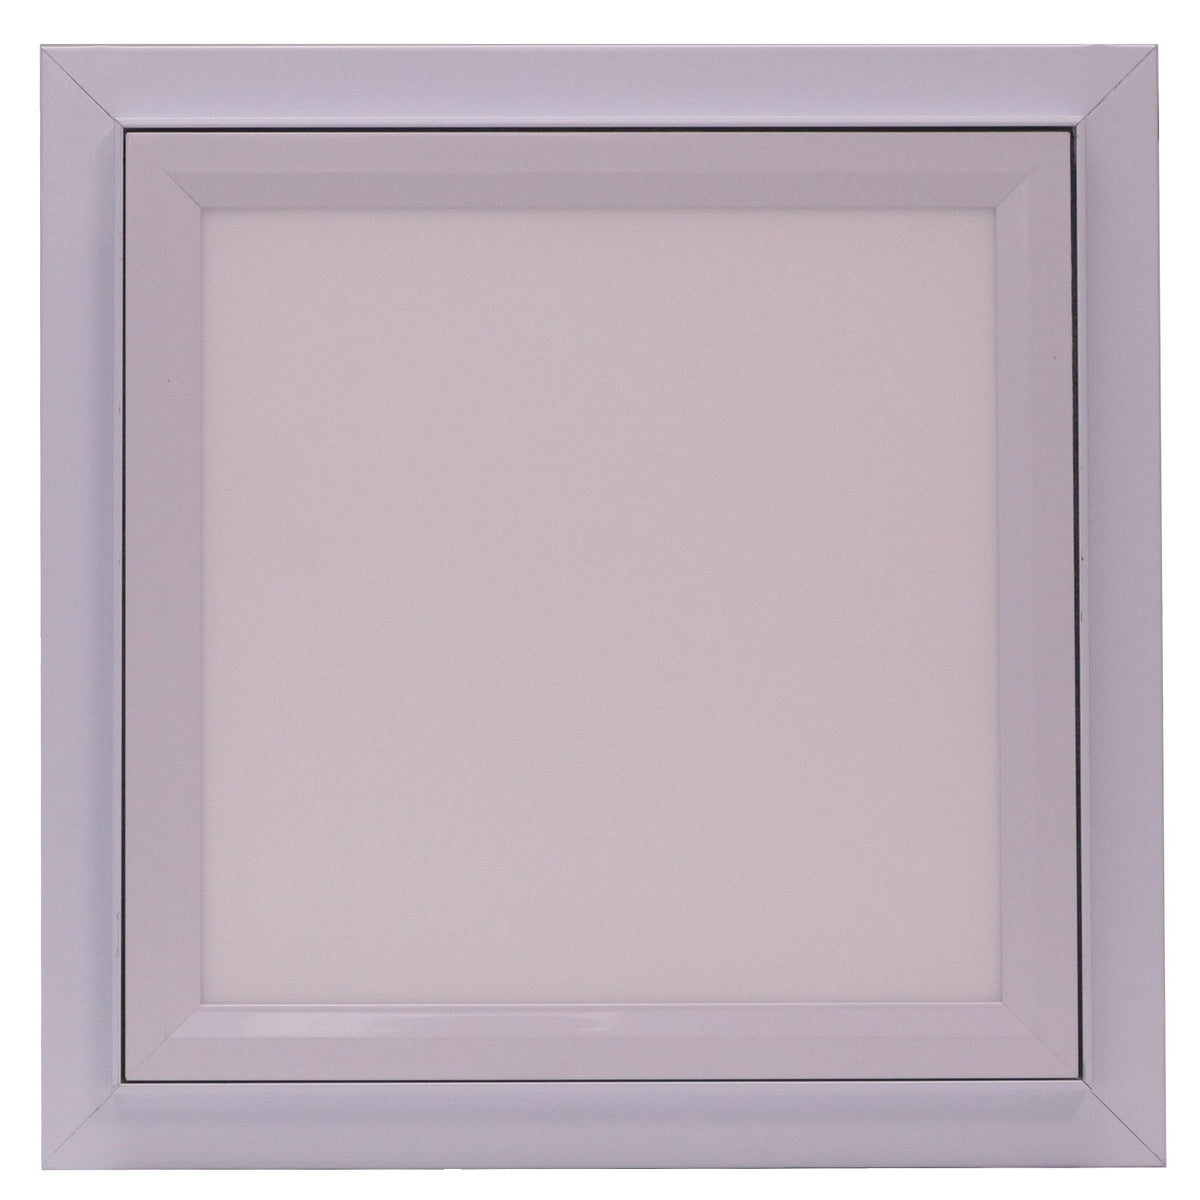 12&quot; X 24&quot; Aluminum LED Light Access Panel Door For Wall / Ceiling Application (Push-Lock) With Frame - [Outer Dimensions: 13&quot; Width X 25&quot; Height]